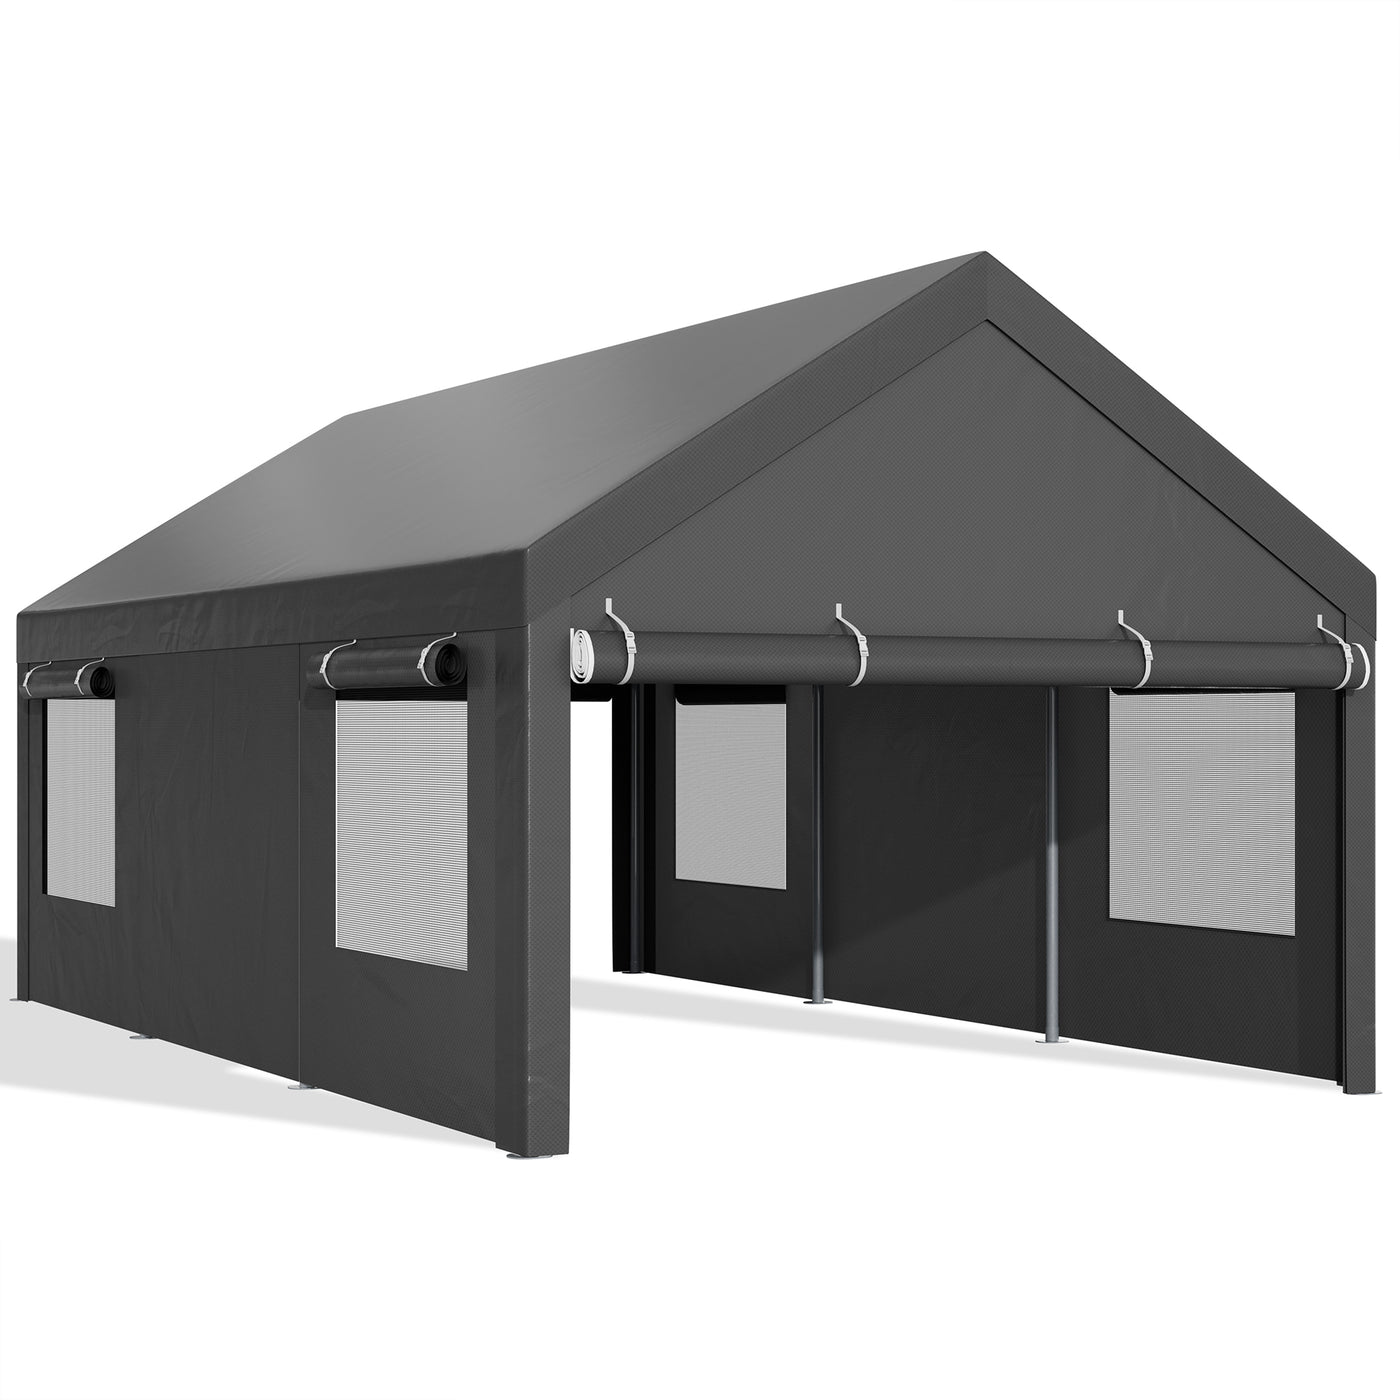 Walsunny Carport, 12x20 ft Heavy Duty Carport Canopy with Roll-up Windows, Portable Garage for Car, Truck, Boat